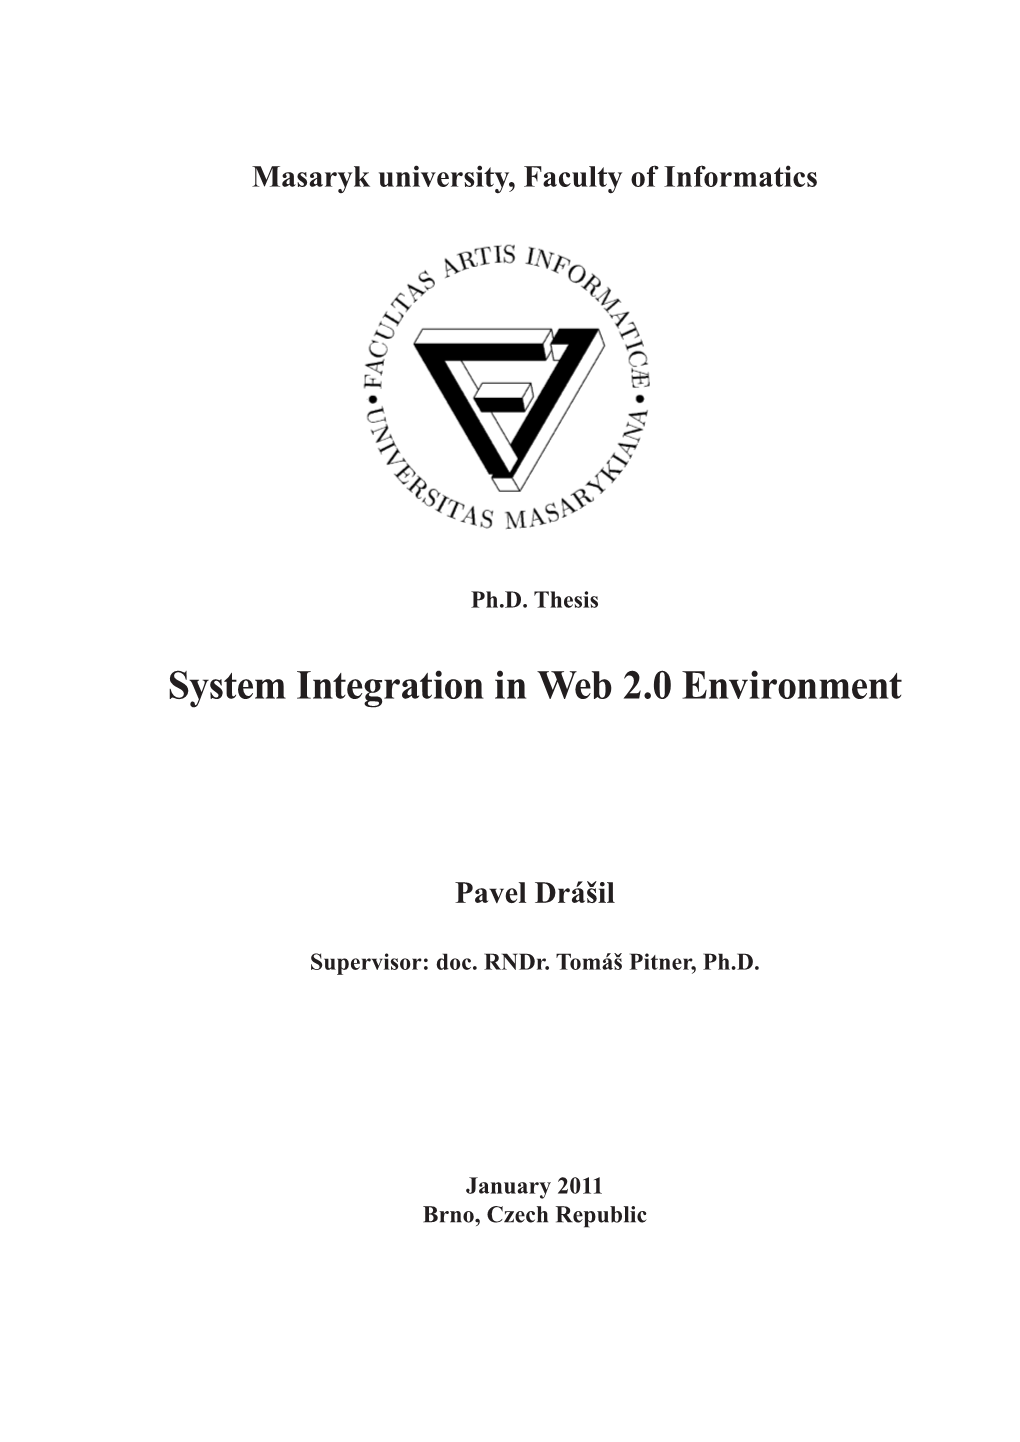 System Integration in Web 2.0 Environment